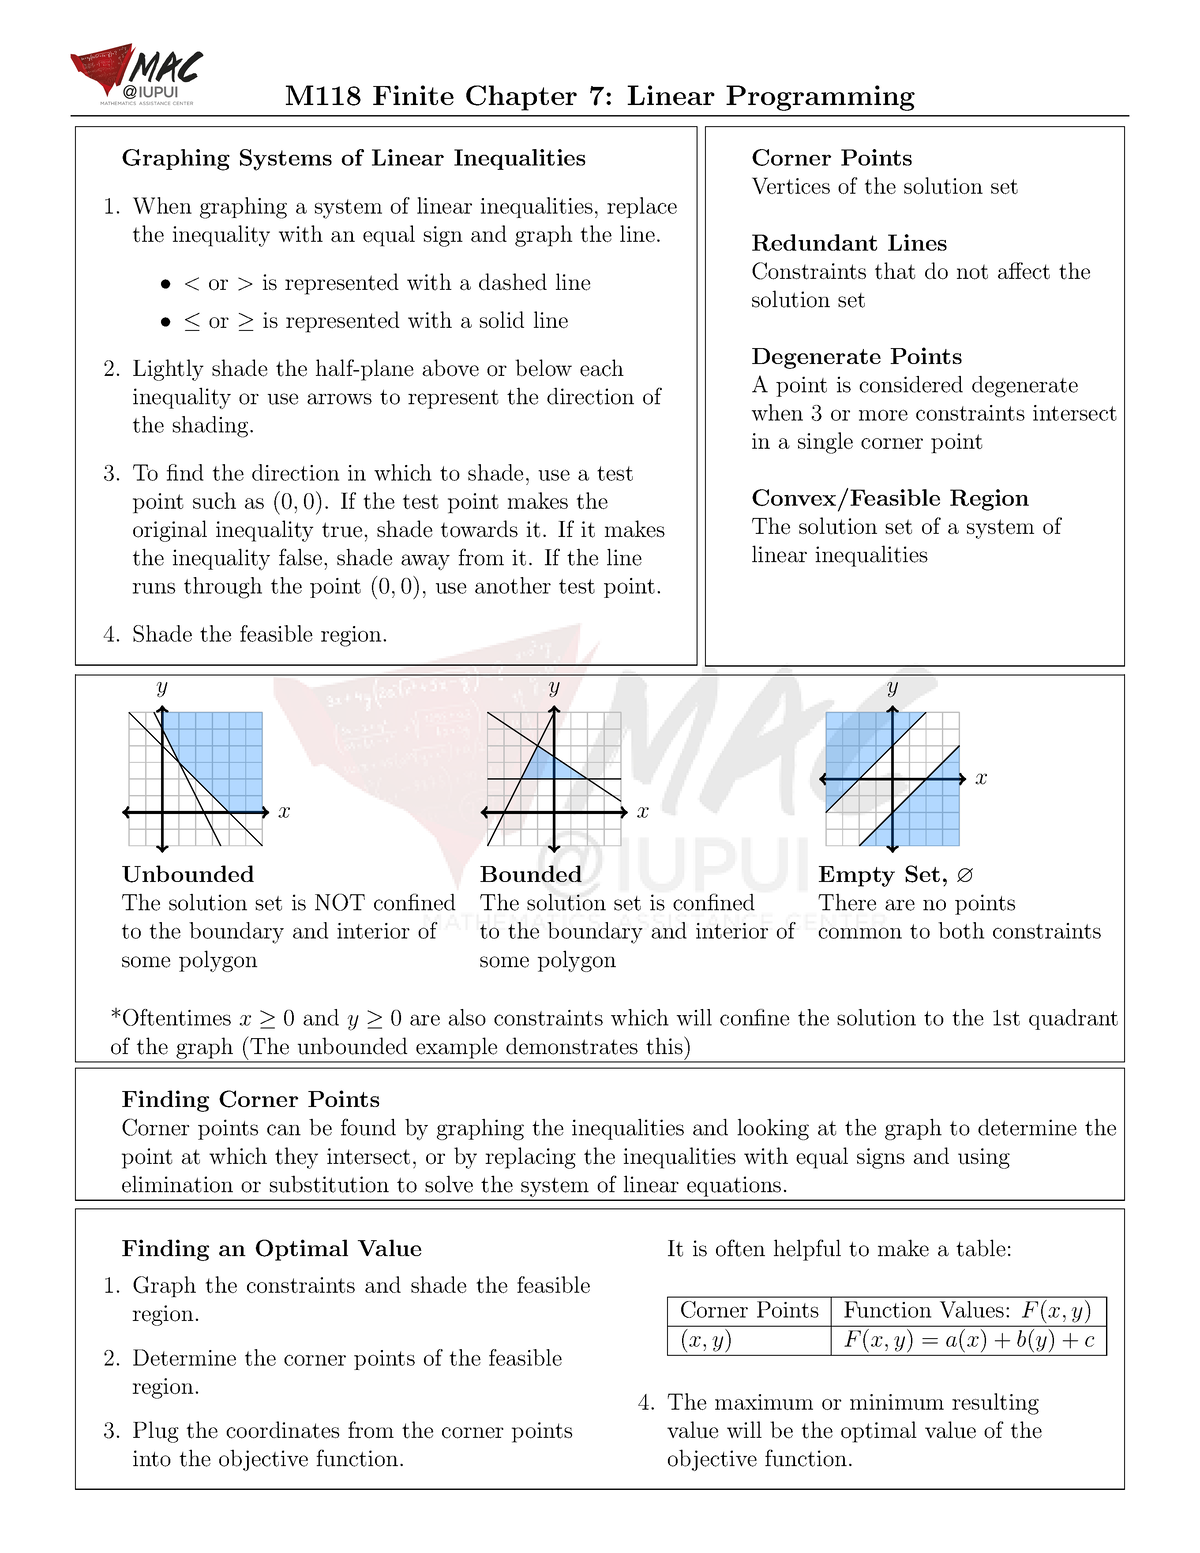 M118 Chapter 7 New Detailed Notes From The Professor M118 Finite Chapter 7 Linear 0650